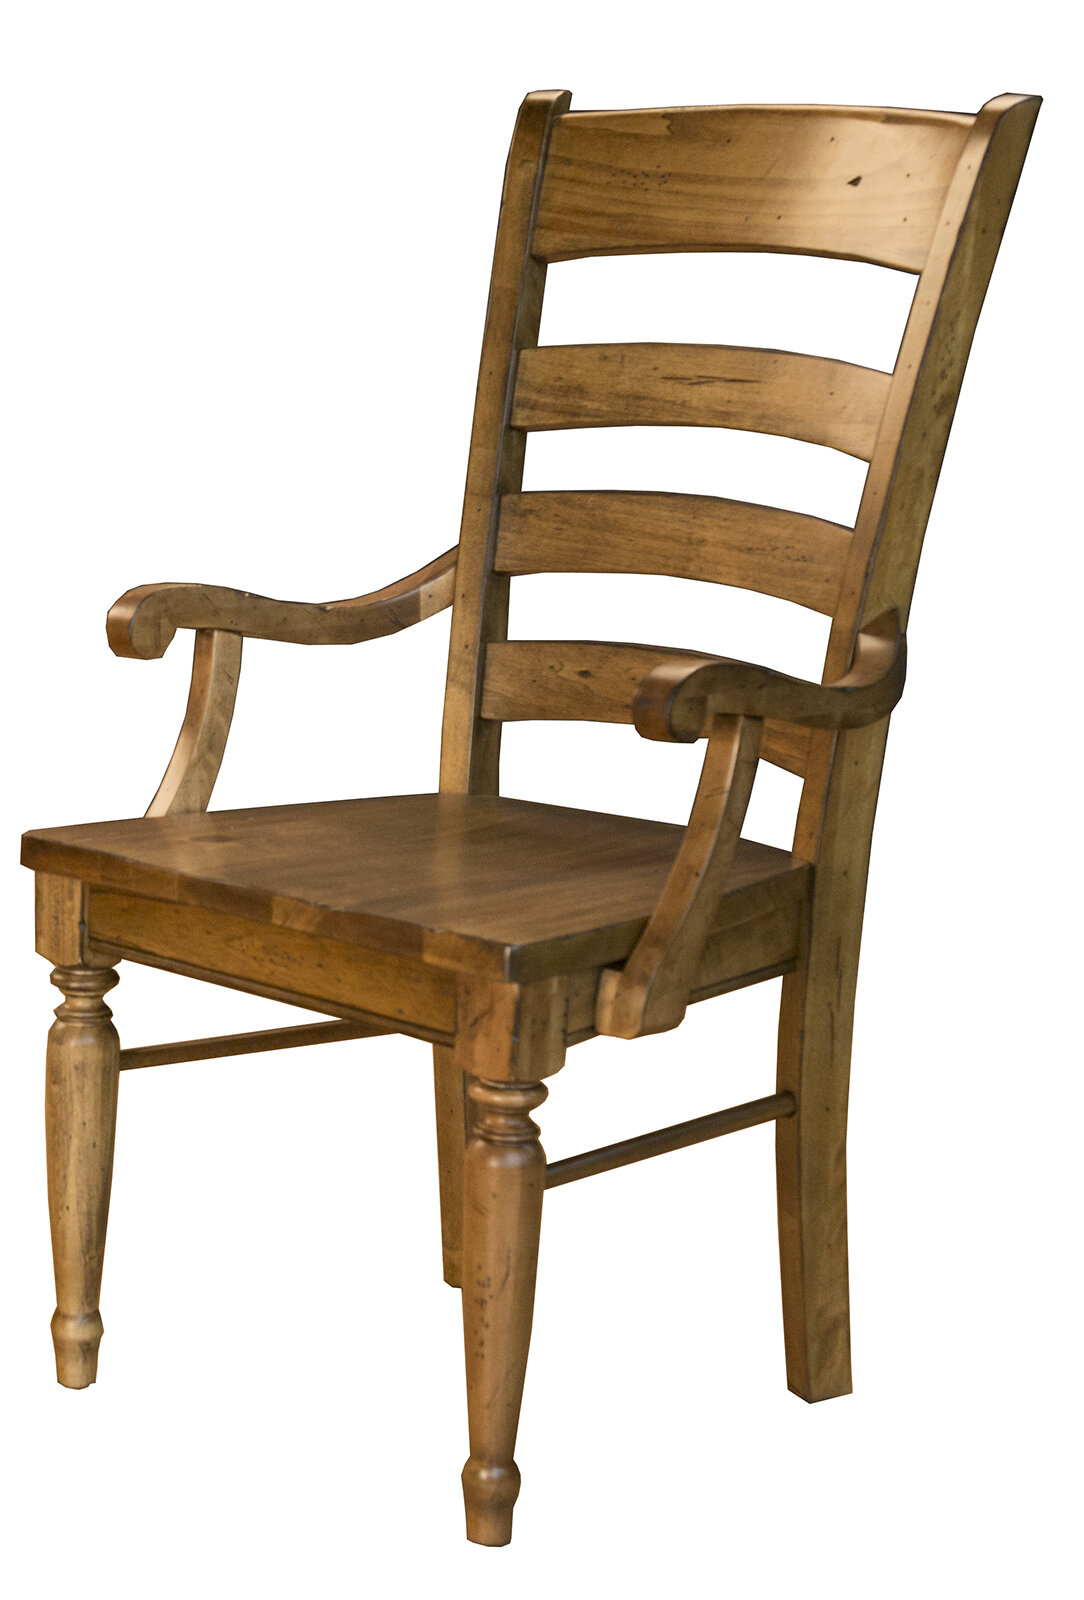 Steffy Wood Products 15-Inch Solid Maple Chair